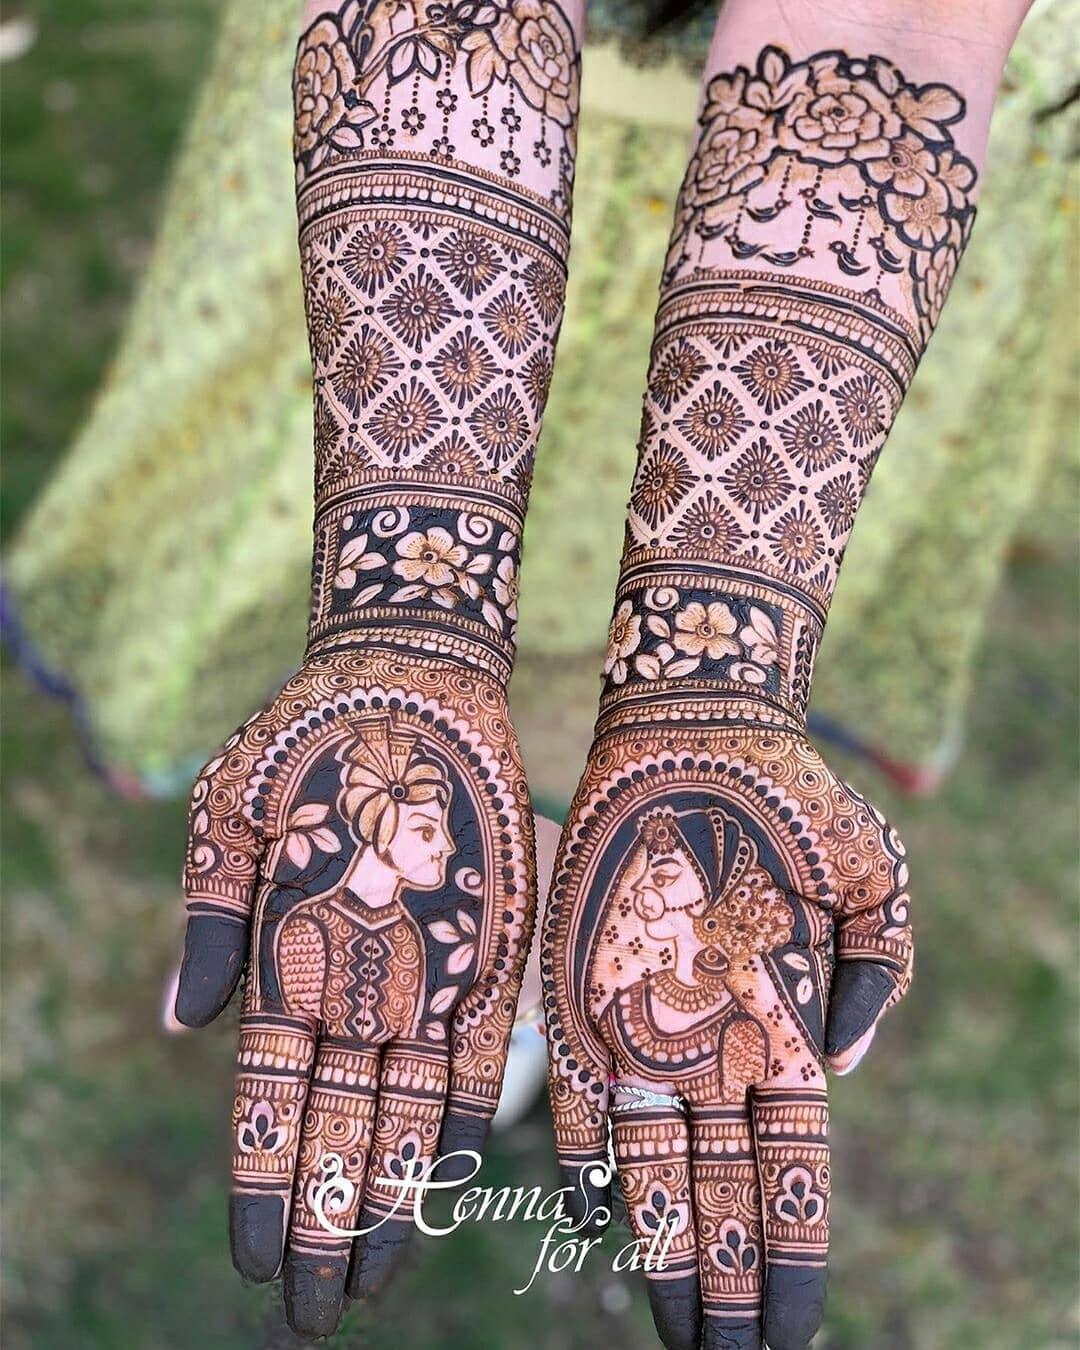 Exquisite Bridal Mehendi: Designs that Tell a Love Story